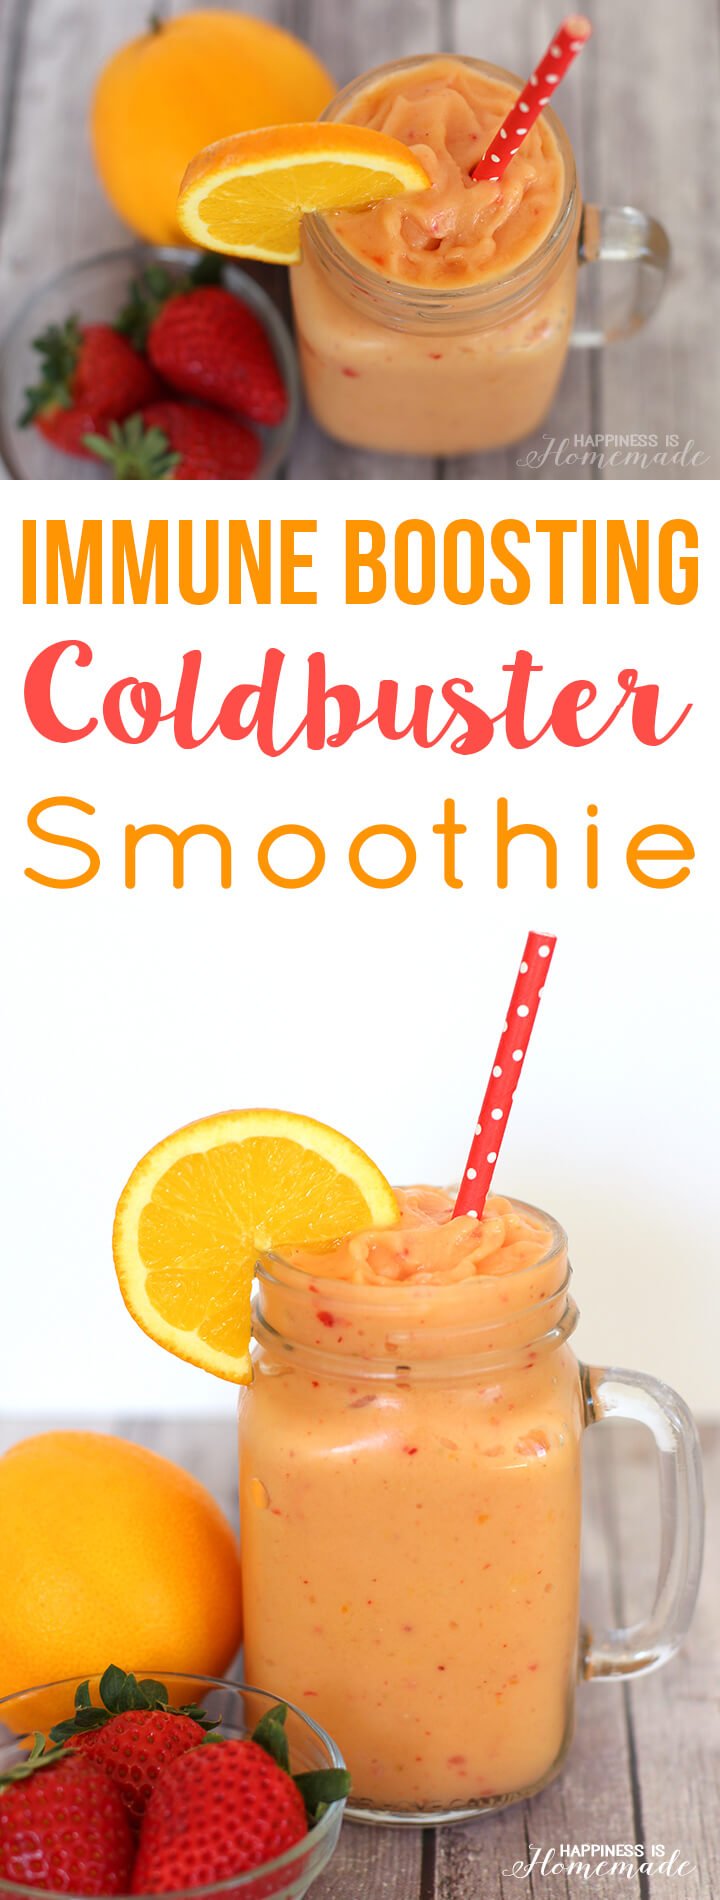 Coldbuster Immune Boosting Smoothie - Happiness is Homemade